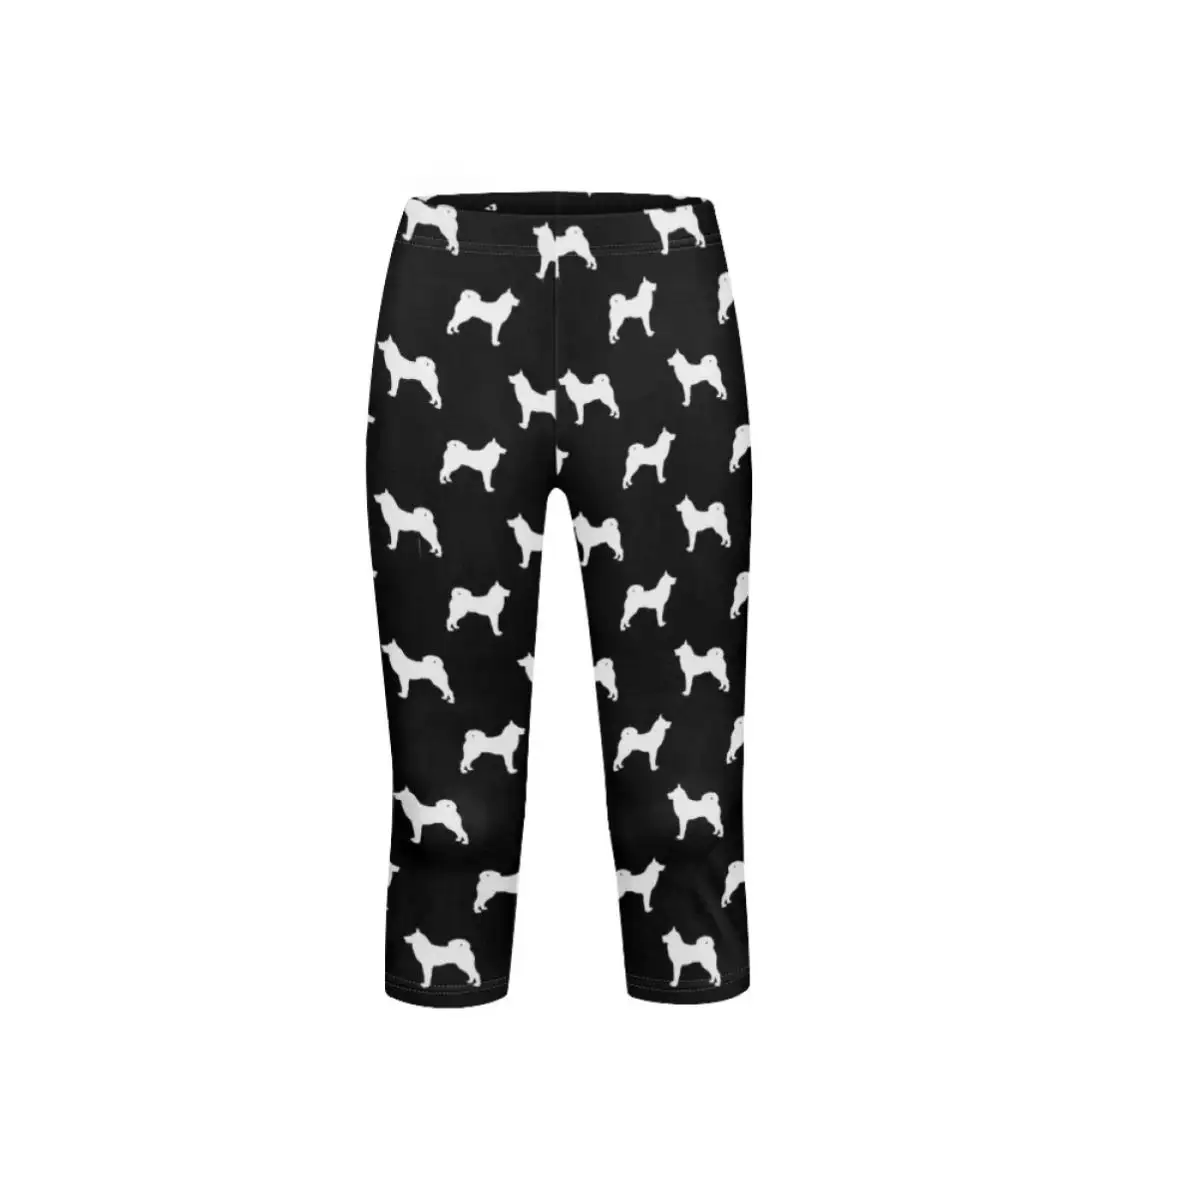 Kids Seamless Short Yoga Pants Cartoon Dogs Elastic Fitness Leggings Running Workout Tights Girl Boys Sports Trousers Wholesale